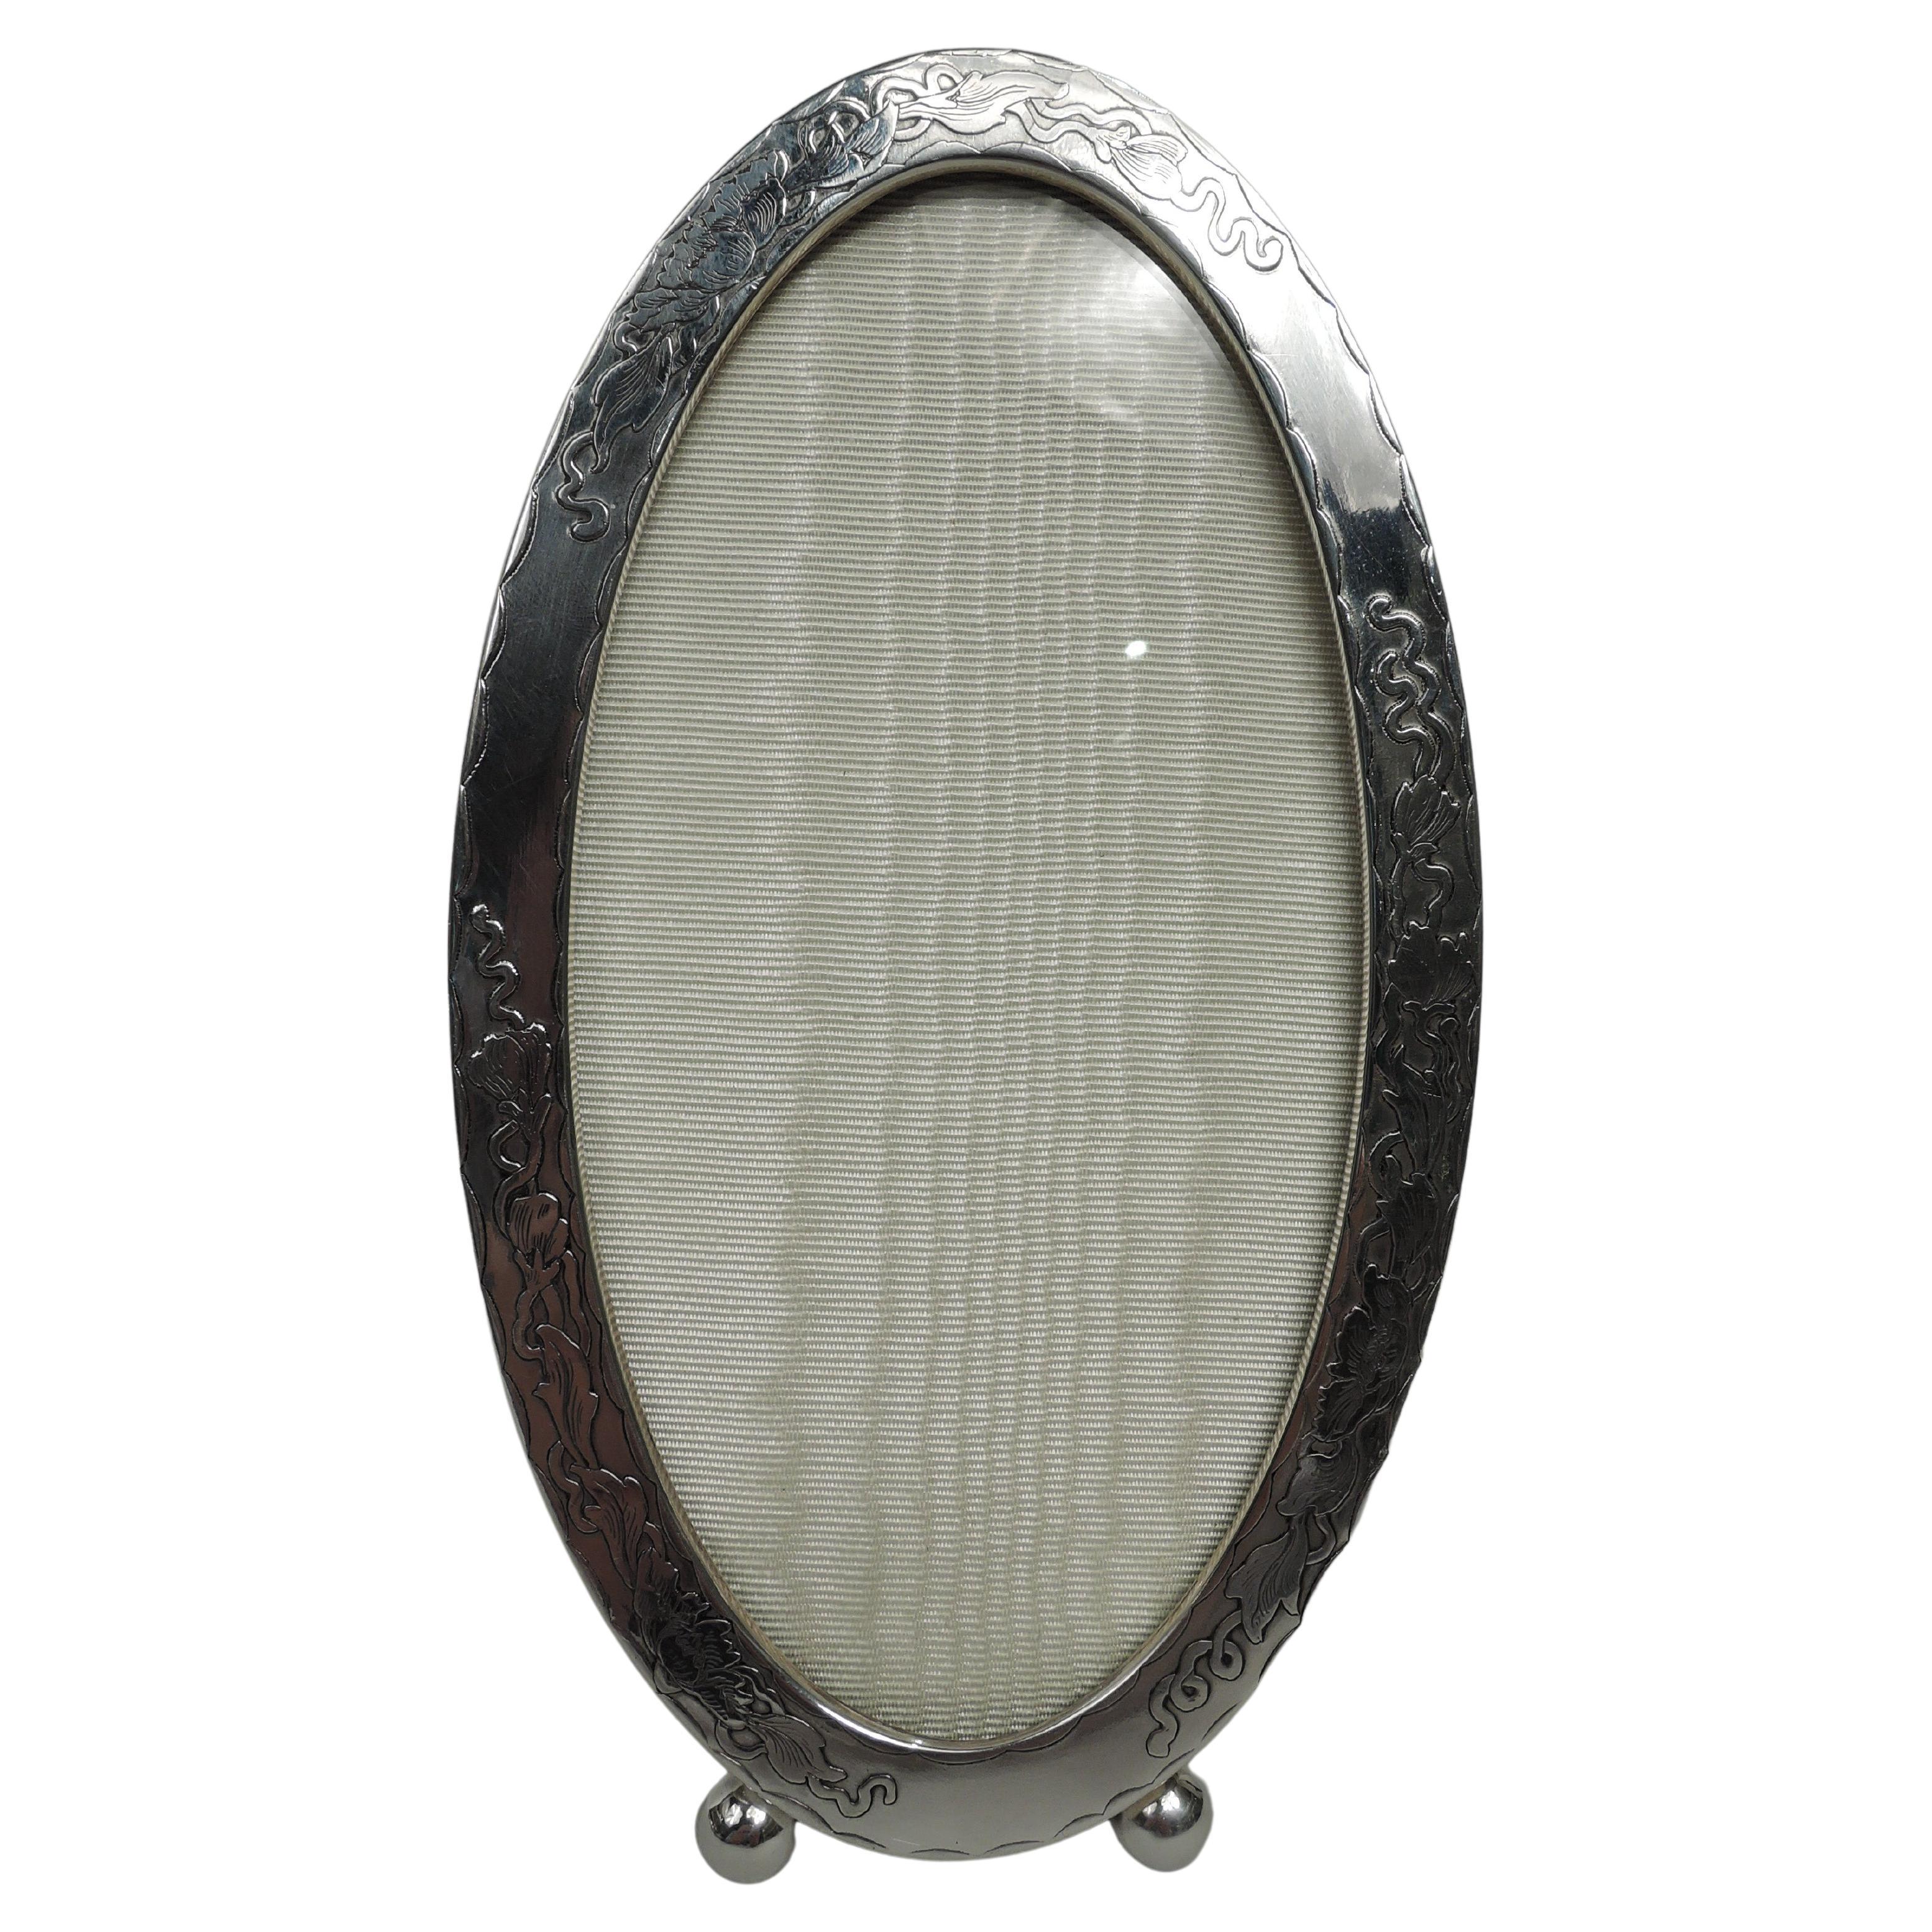 Lovely American Art Nouveau Sterling Silver Oval Picture Frame For Sale